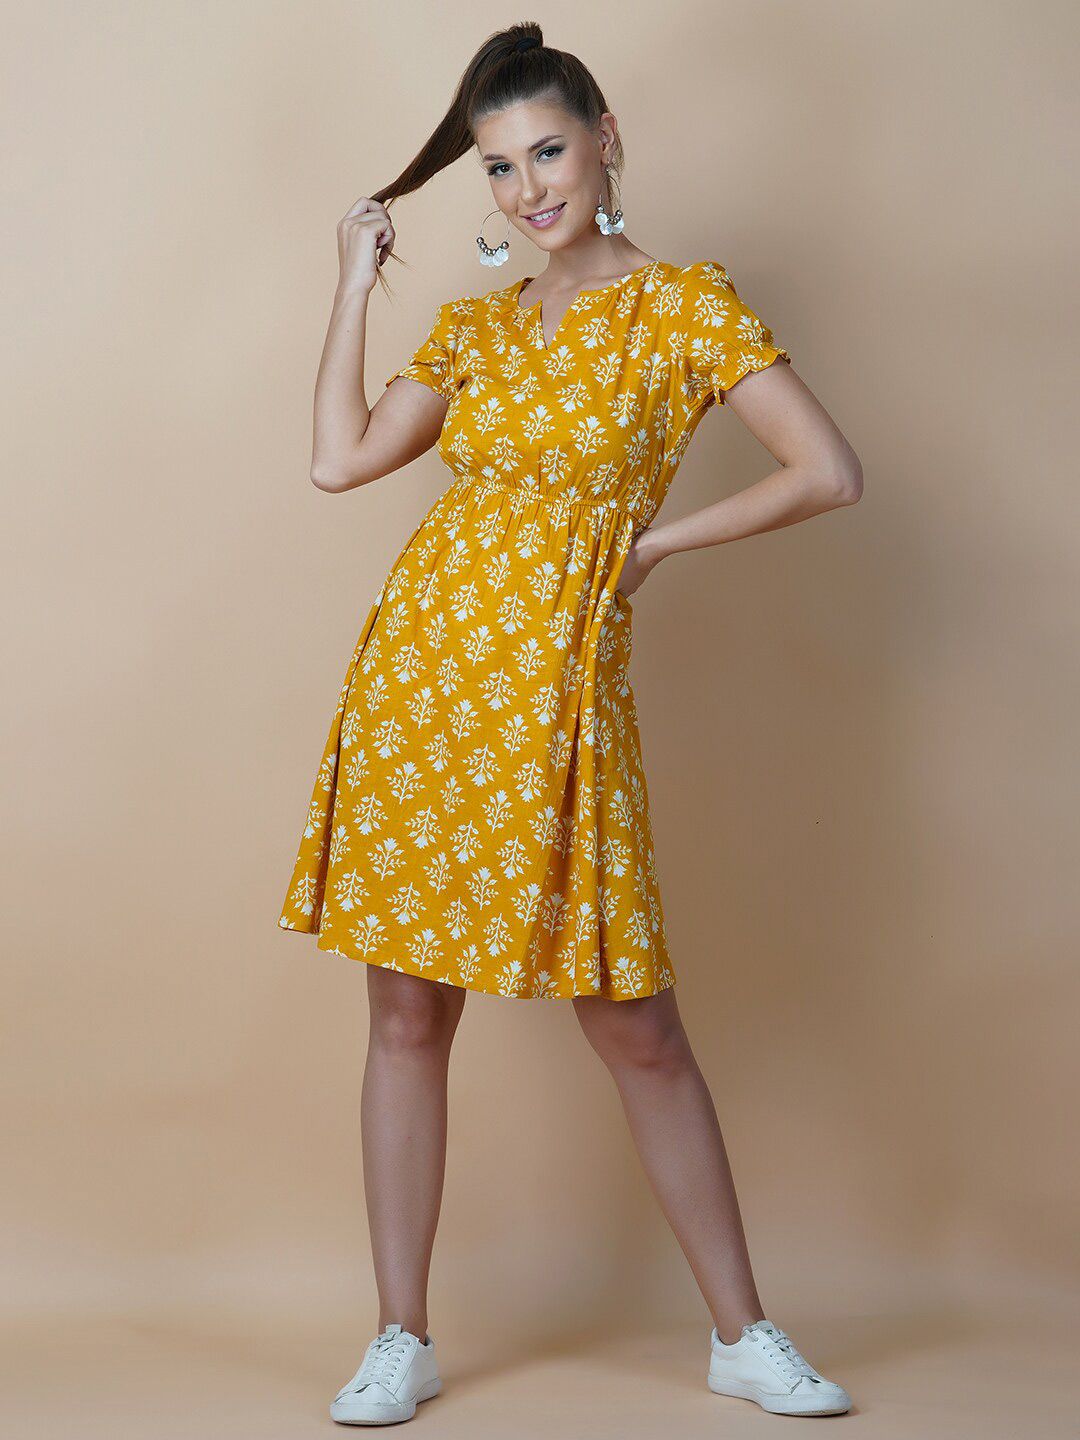 Twilldor Yellow Cotton Floral Ethnic Dress Price in India